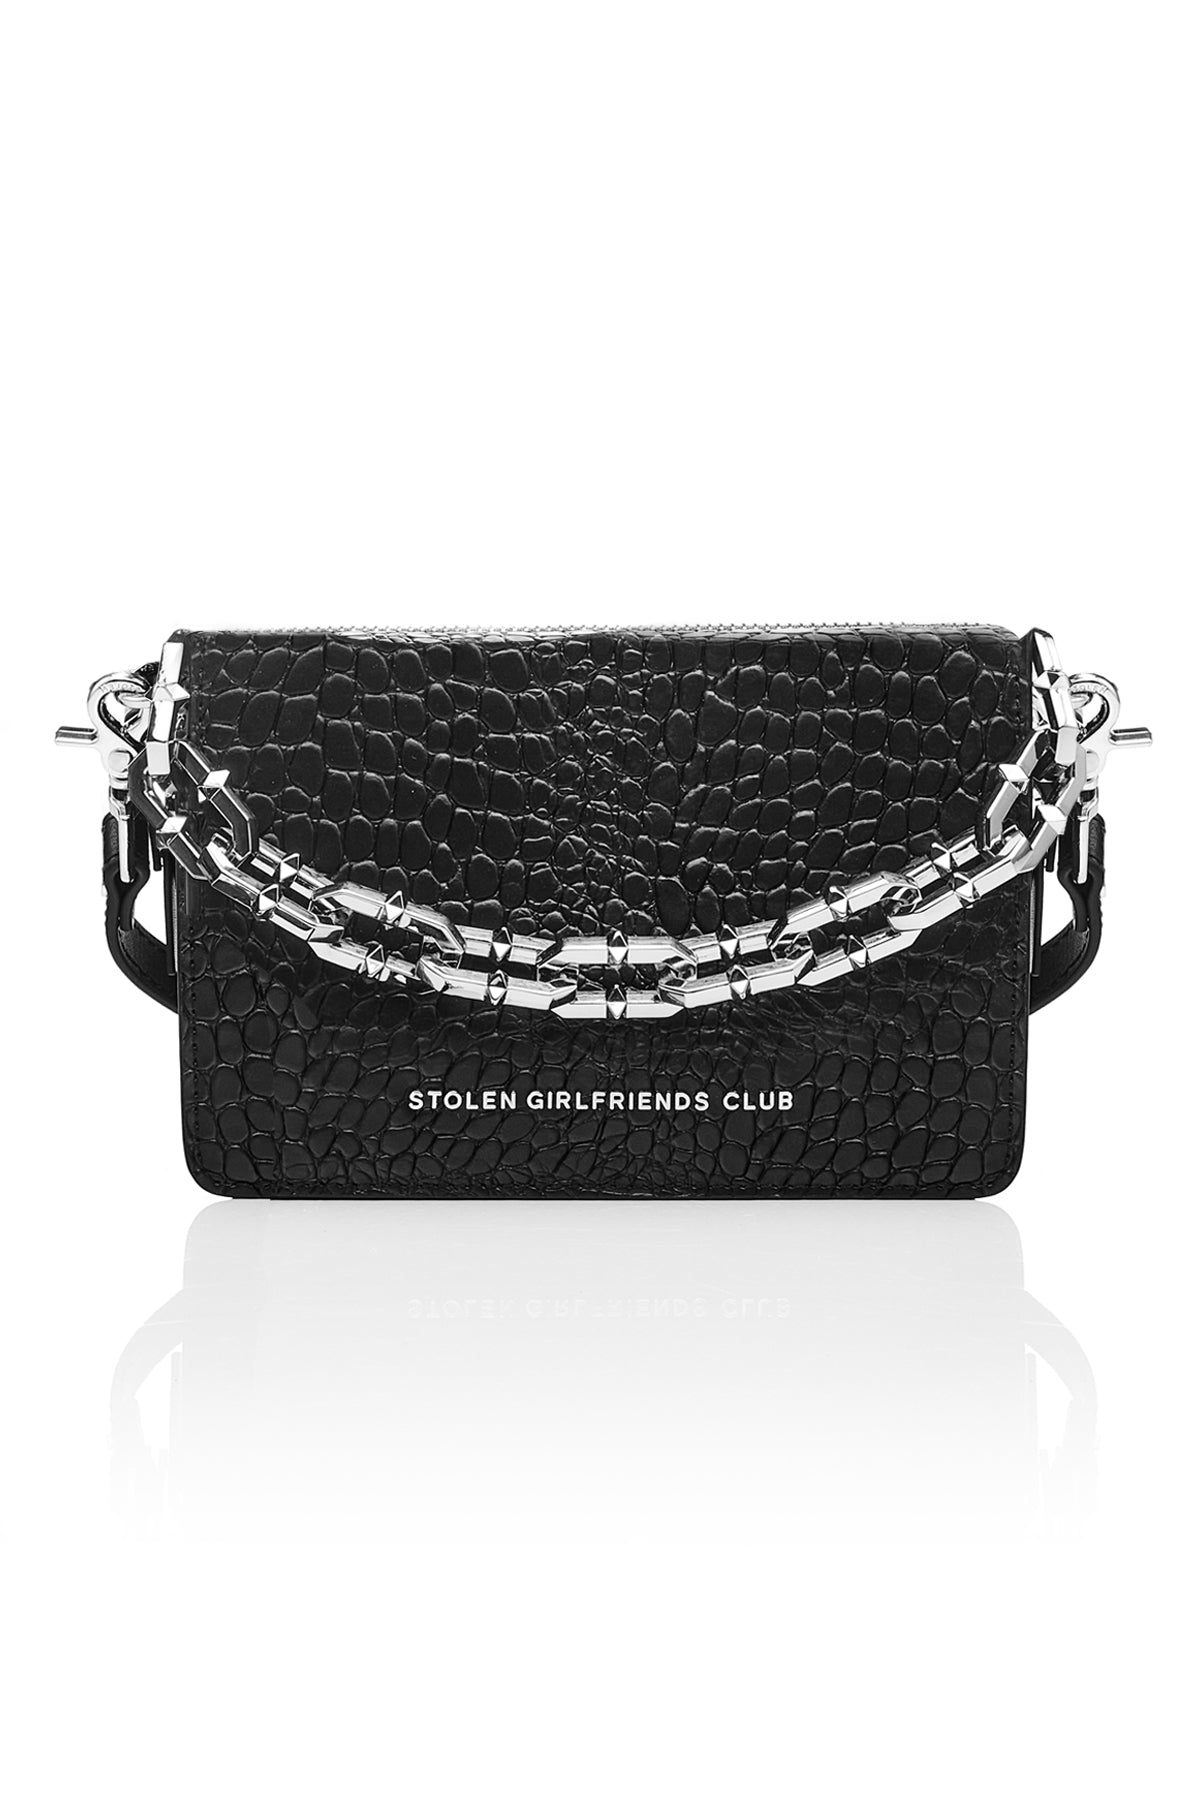 The Stolen Girlfriends Club Little Trouble Bag is an edgy crossbody bag, now available in Matte Black.  Crafted in 100% genuine leather and features a funky crocodile texture throughout.  The Little Trouble Bag opens via a magnetic flap, and features a metal 'Stolen Girlfriends Club' plaque at the front, internal card slots, two internal zipper pockets, and comes with plain self and optional chunky chain straps.